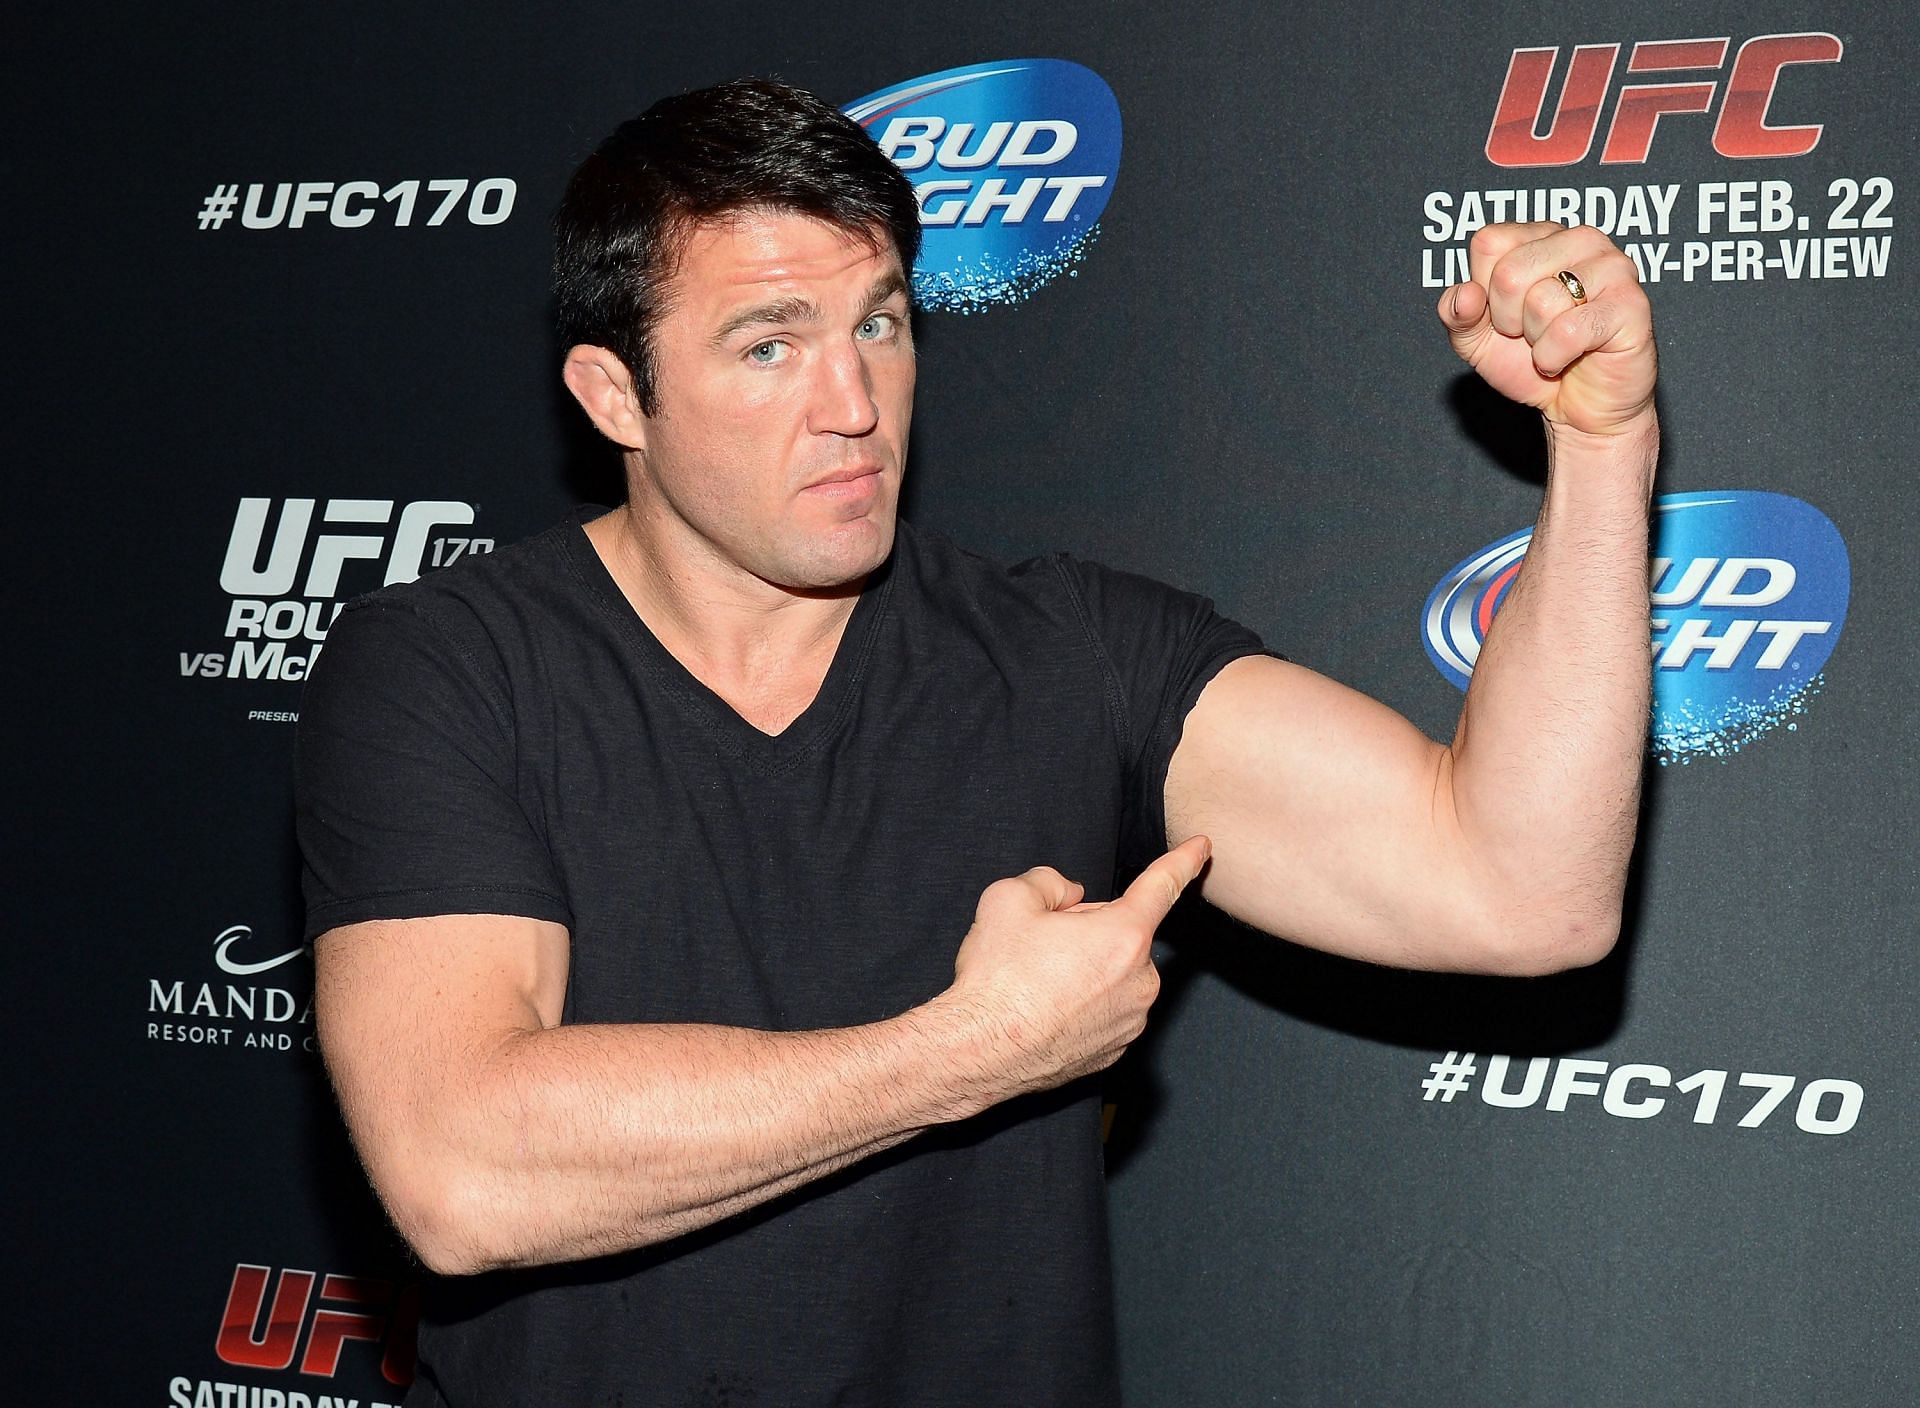 Sonnen finished his career with a record of 31-17-1